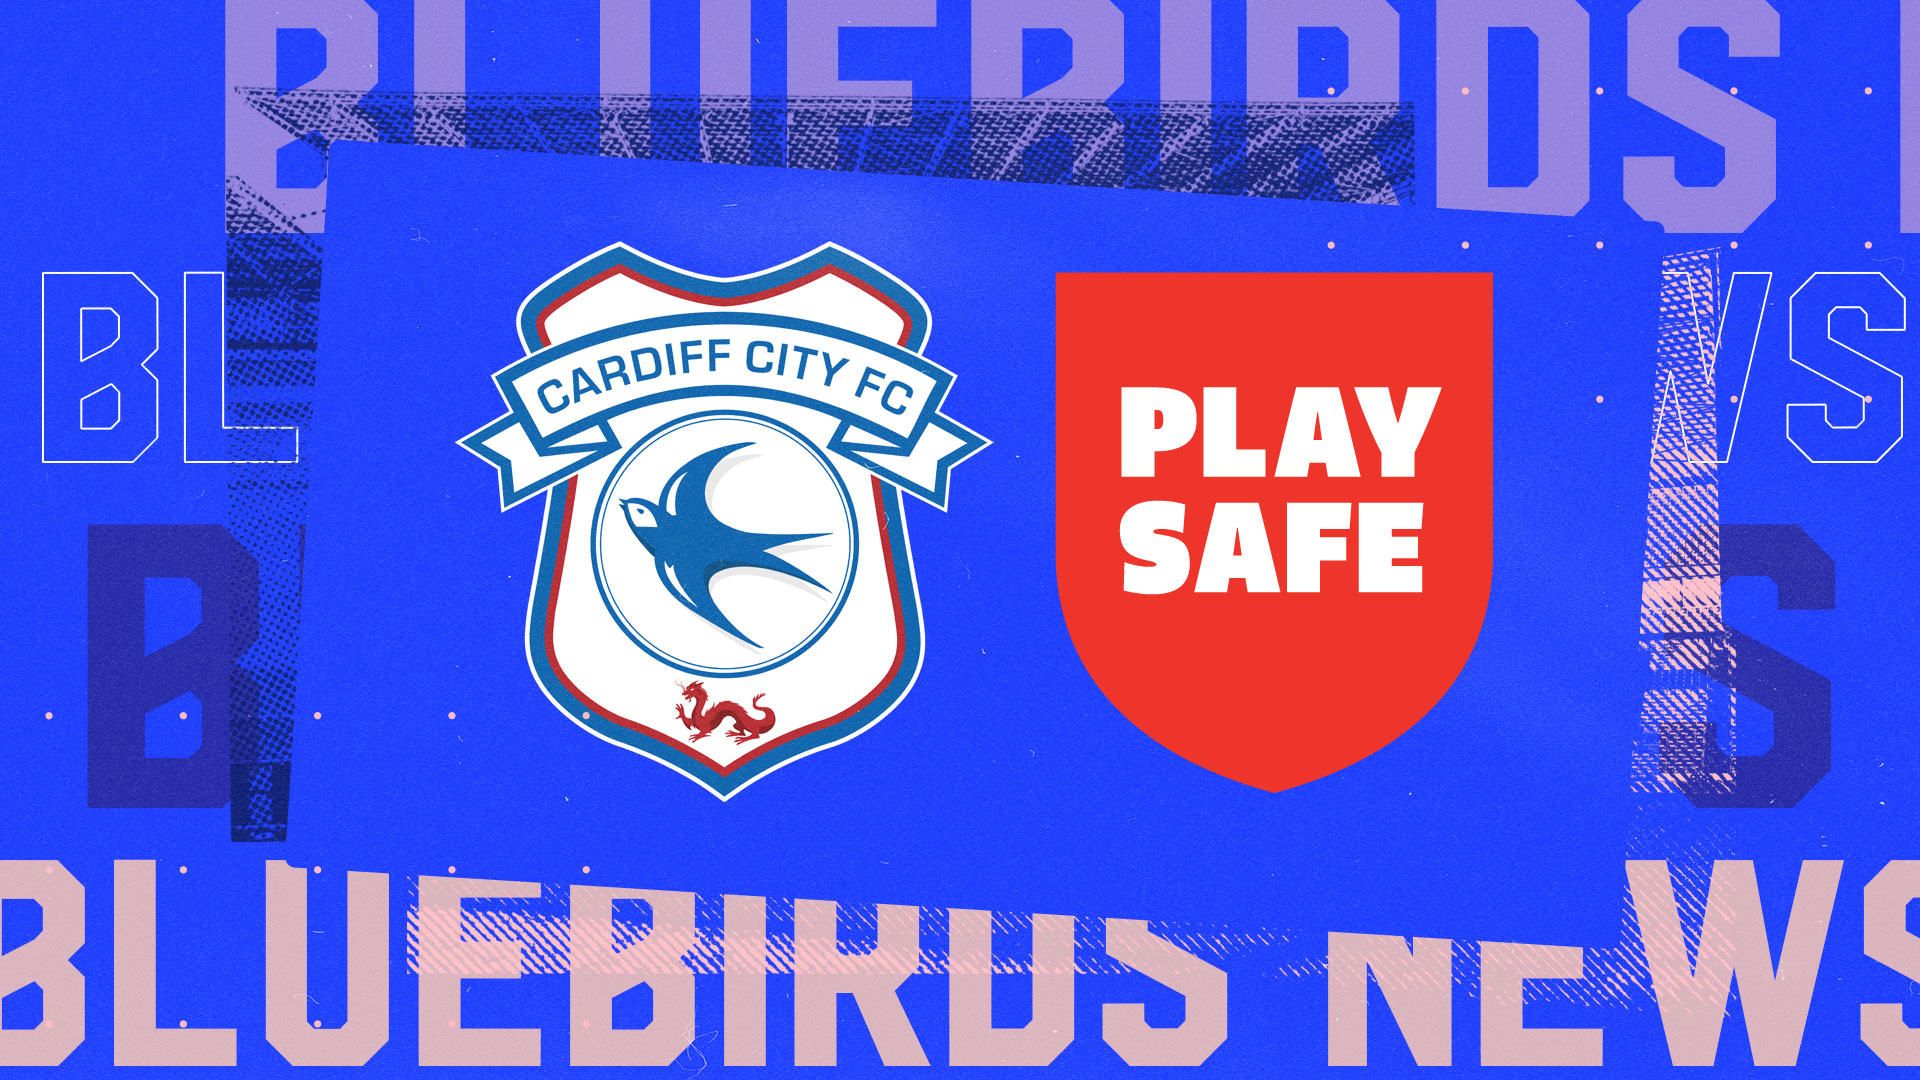 The Bluebirds are backing the Play Safe campaign...